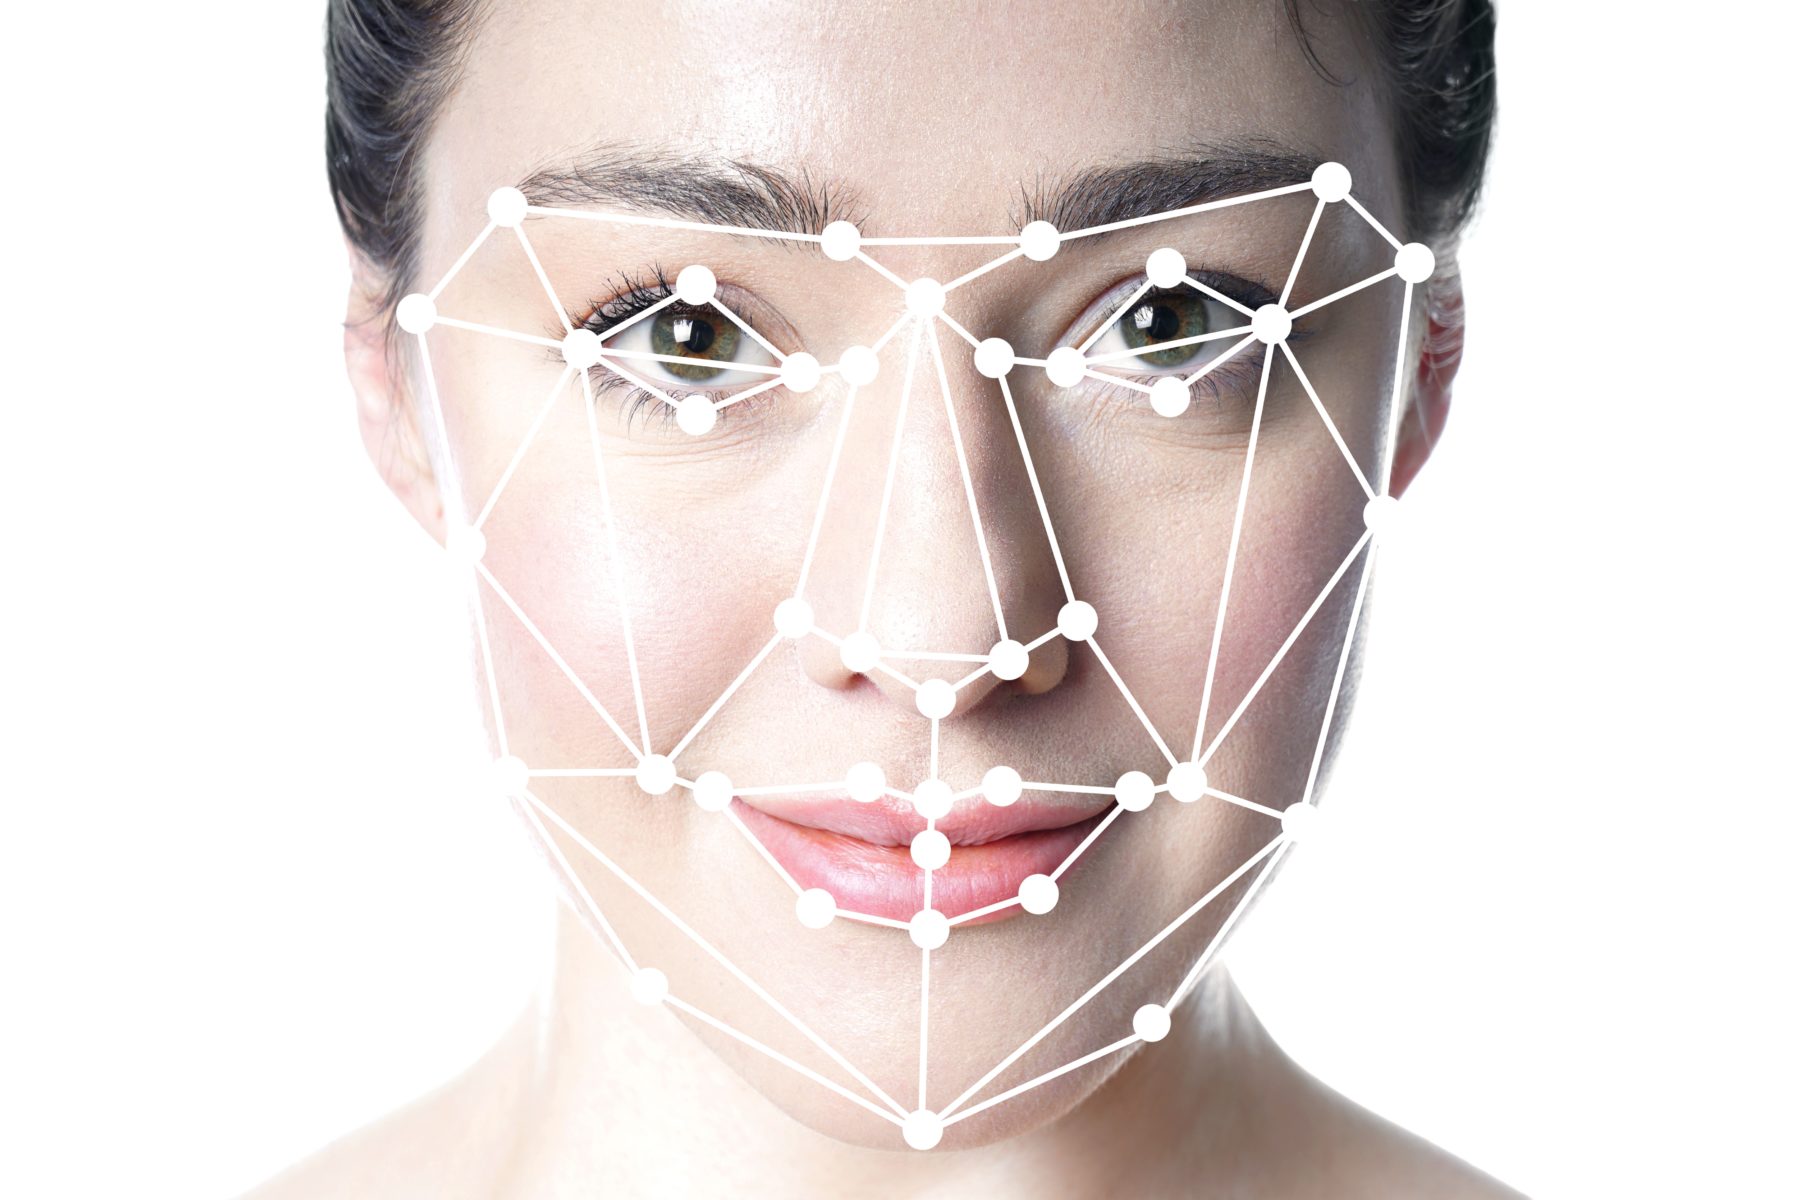 Daminion has developed a facial recognition technology, which will be available for use for their servers in the upcoming weeks.